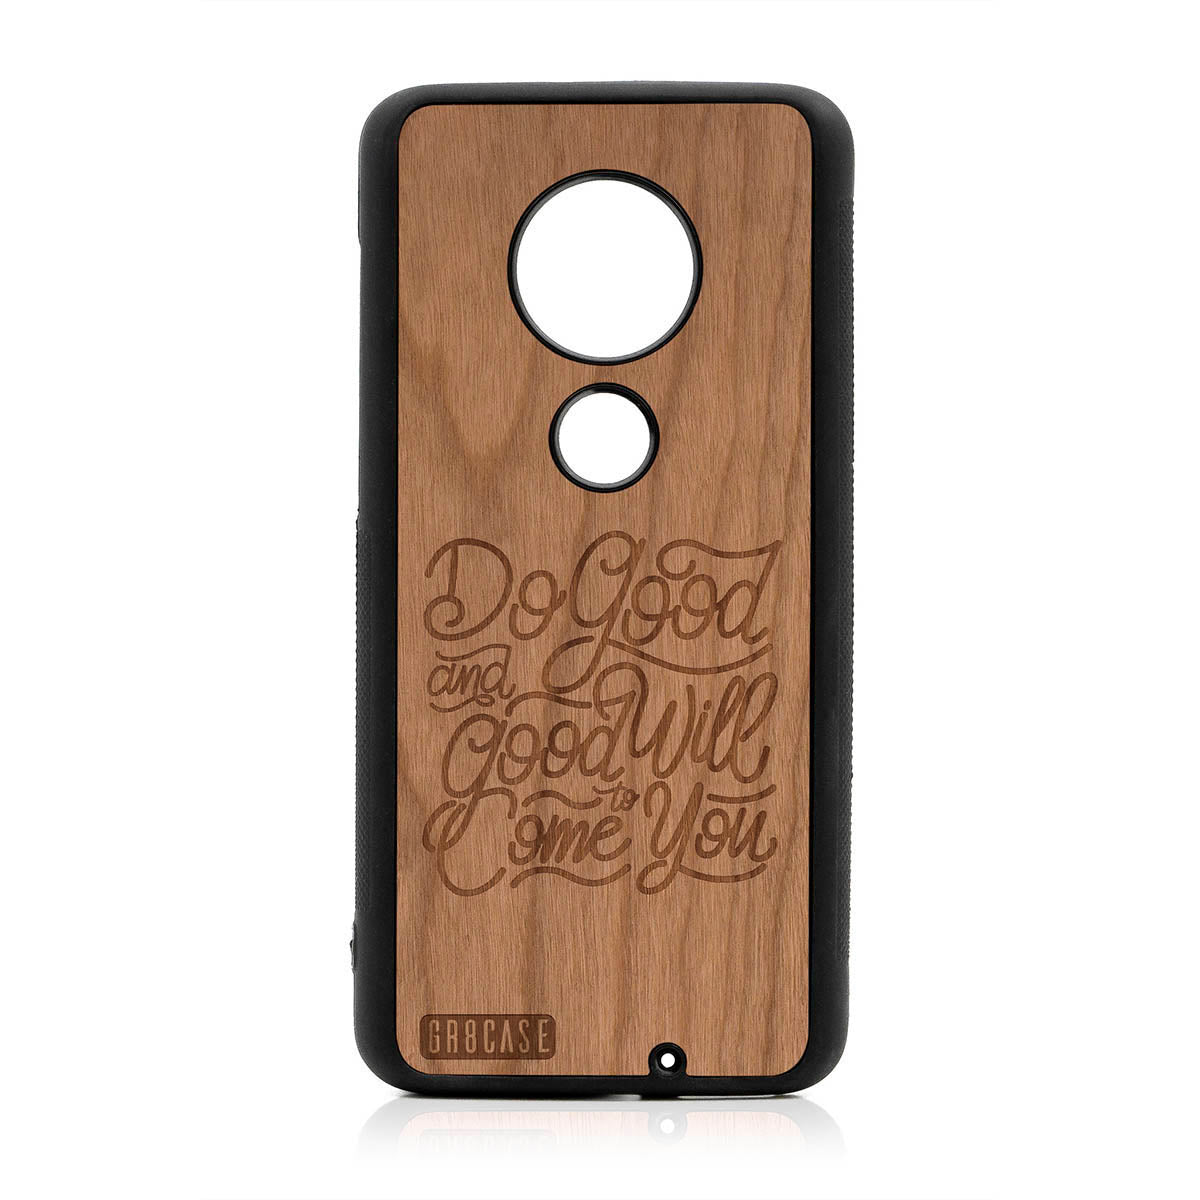 Do Good And Good Will Come To You Design Wood Case For Moto G7 Plus by GR8CASE